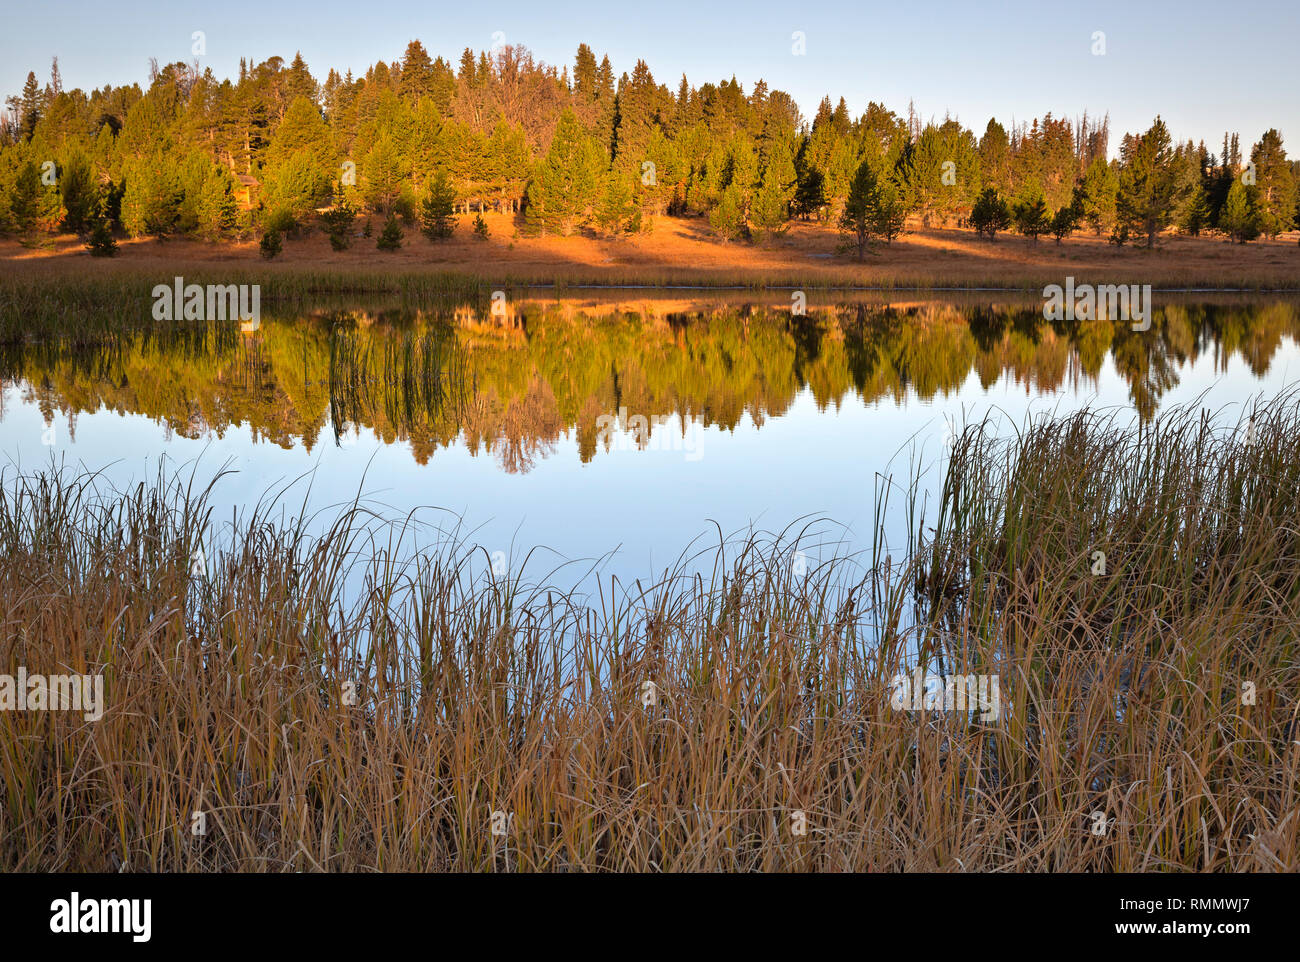 WYOMING - Reflections in a pond near the shores of Island Lake in the early morning hours in the Beartooth Mountains area of Shoshone National Forest. Stock Photo